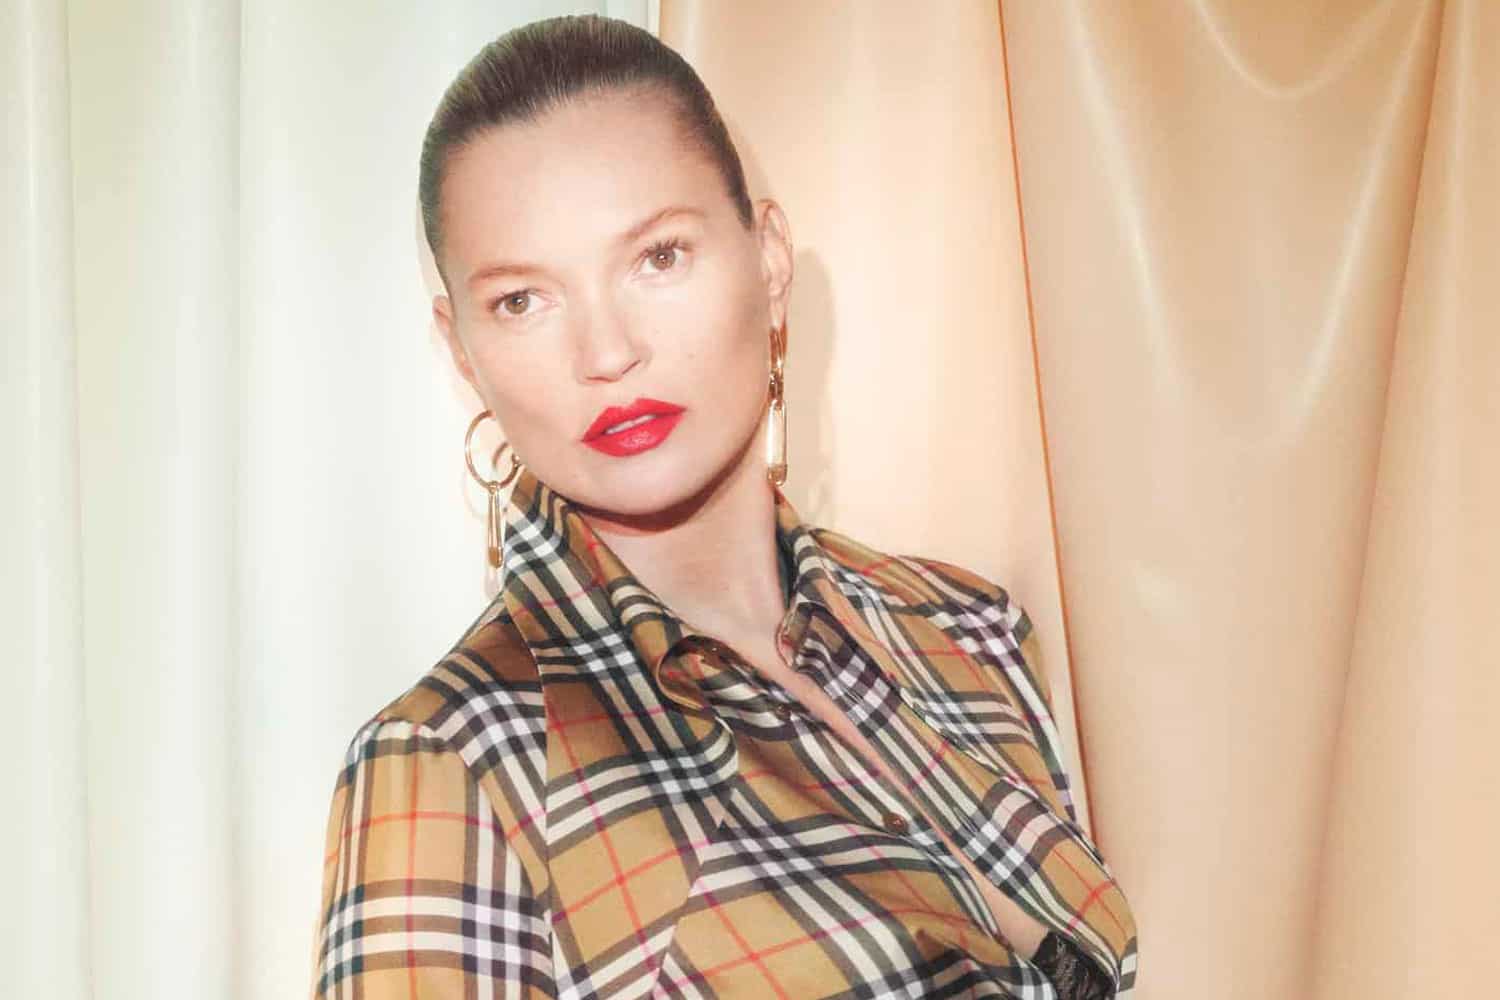 Kate Moss Models MARC JACOBS Resort 2023 Collection